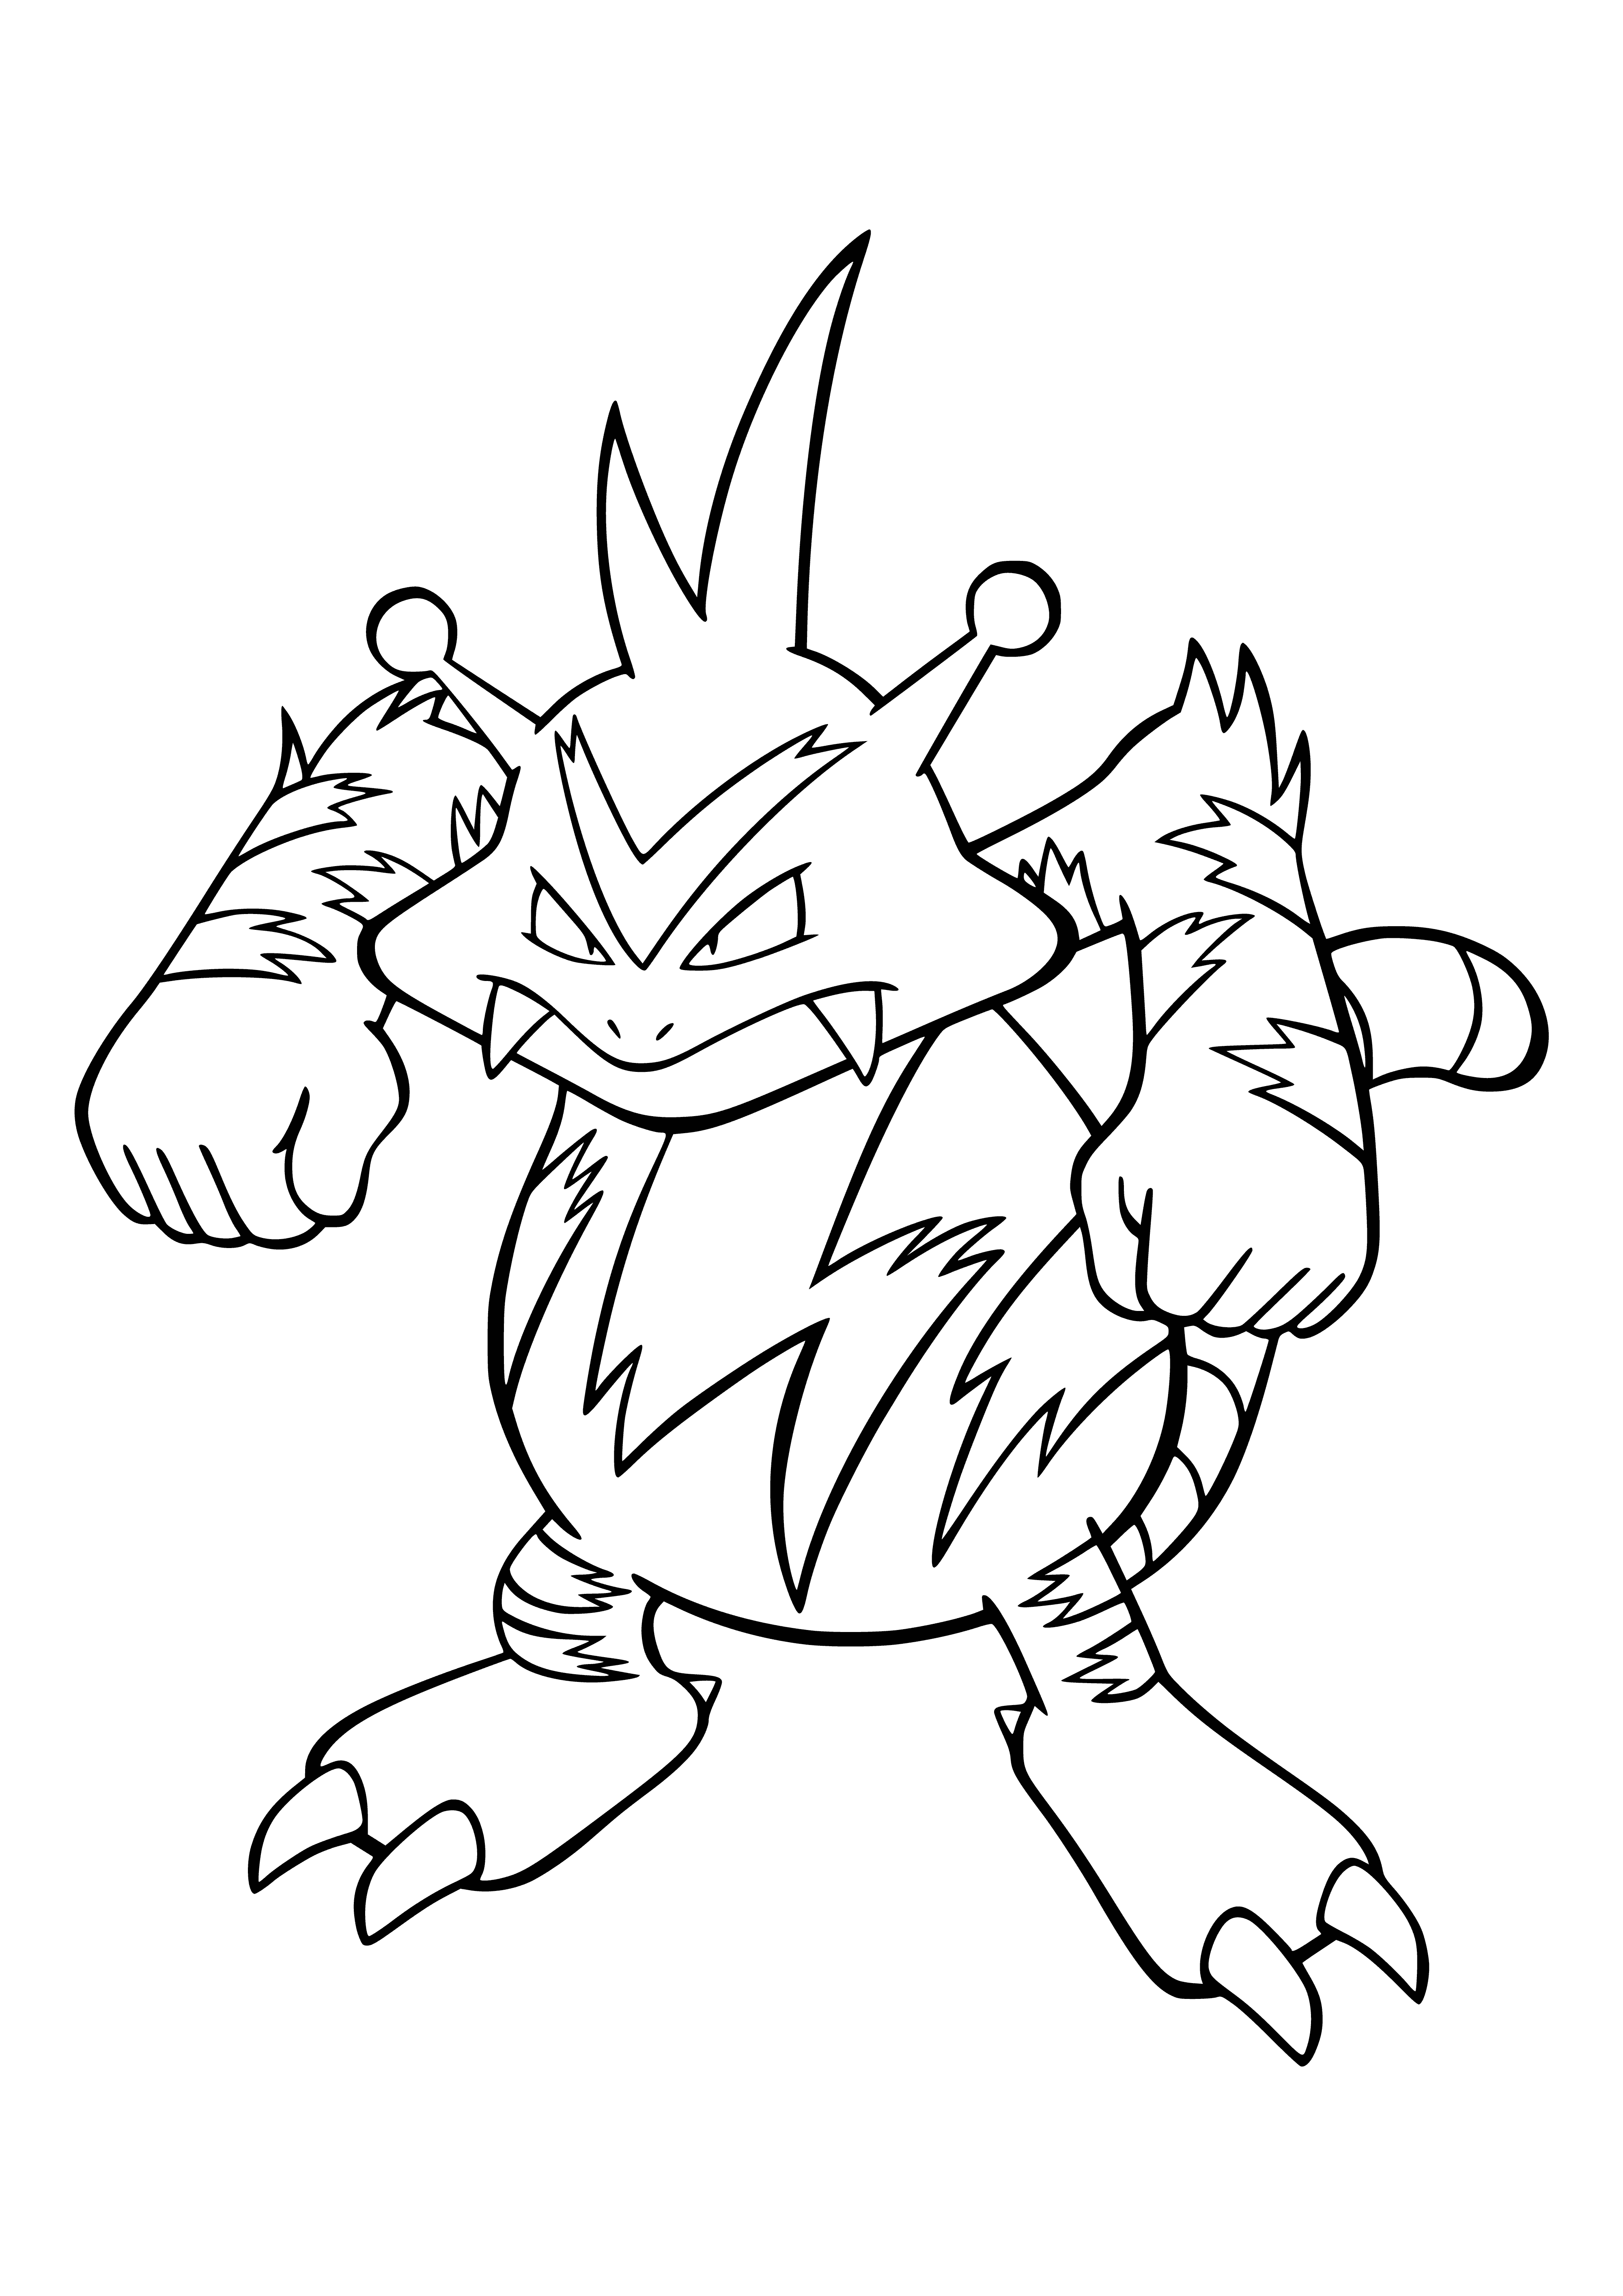 coloring page: Yellow electric Pokemon w/ long tail & black zigzag pattern, black stripe, black bands on arms, red eyes, red pincers.